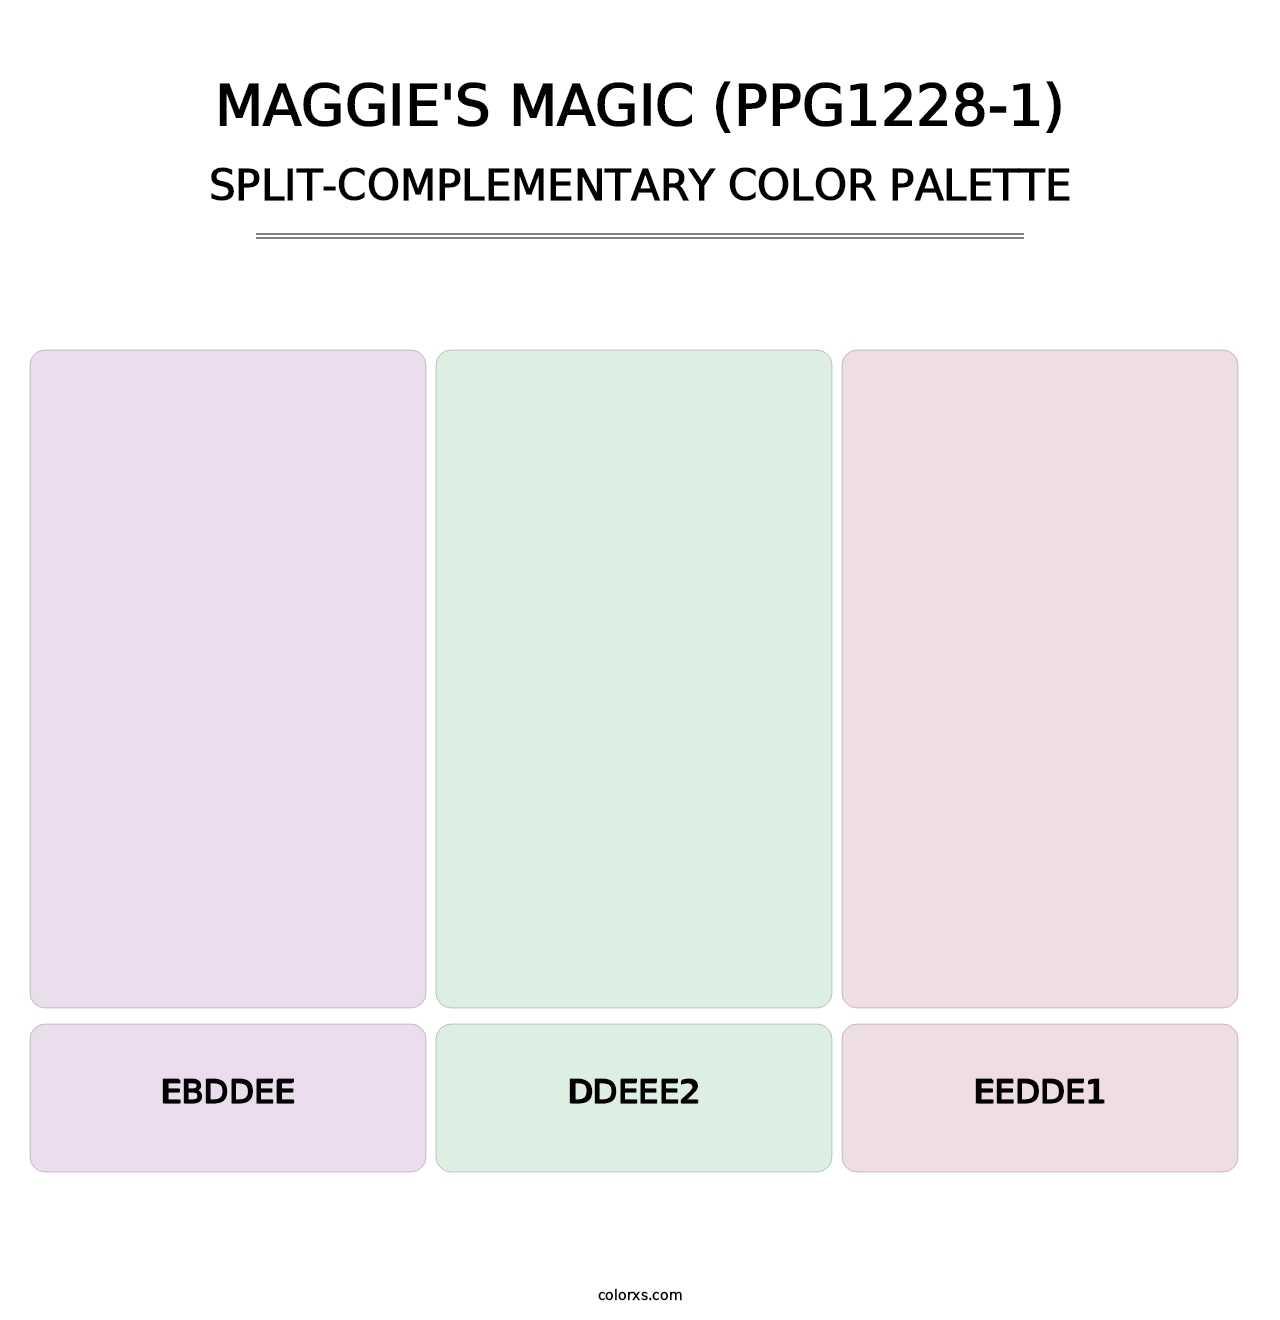 Maggie's Magic (PPG1228-1) - Split-Complementary Color Palette